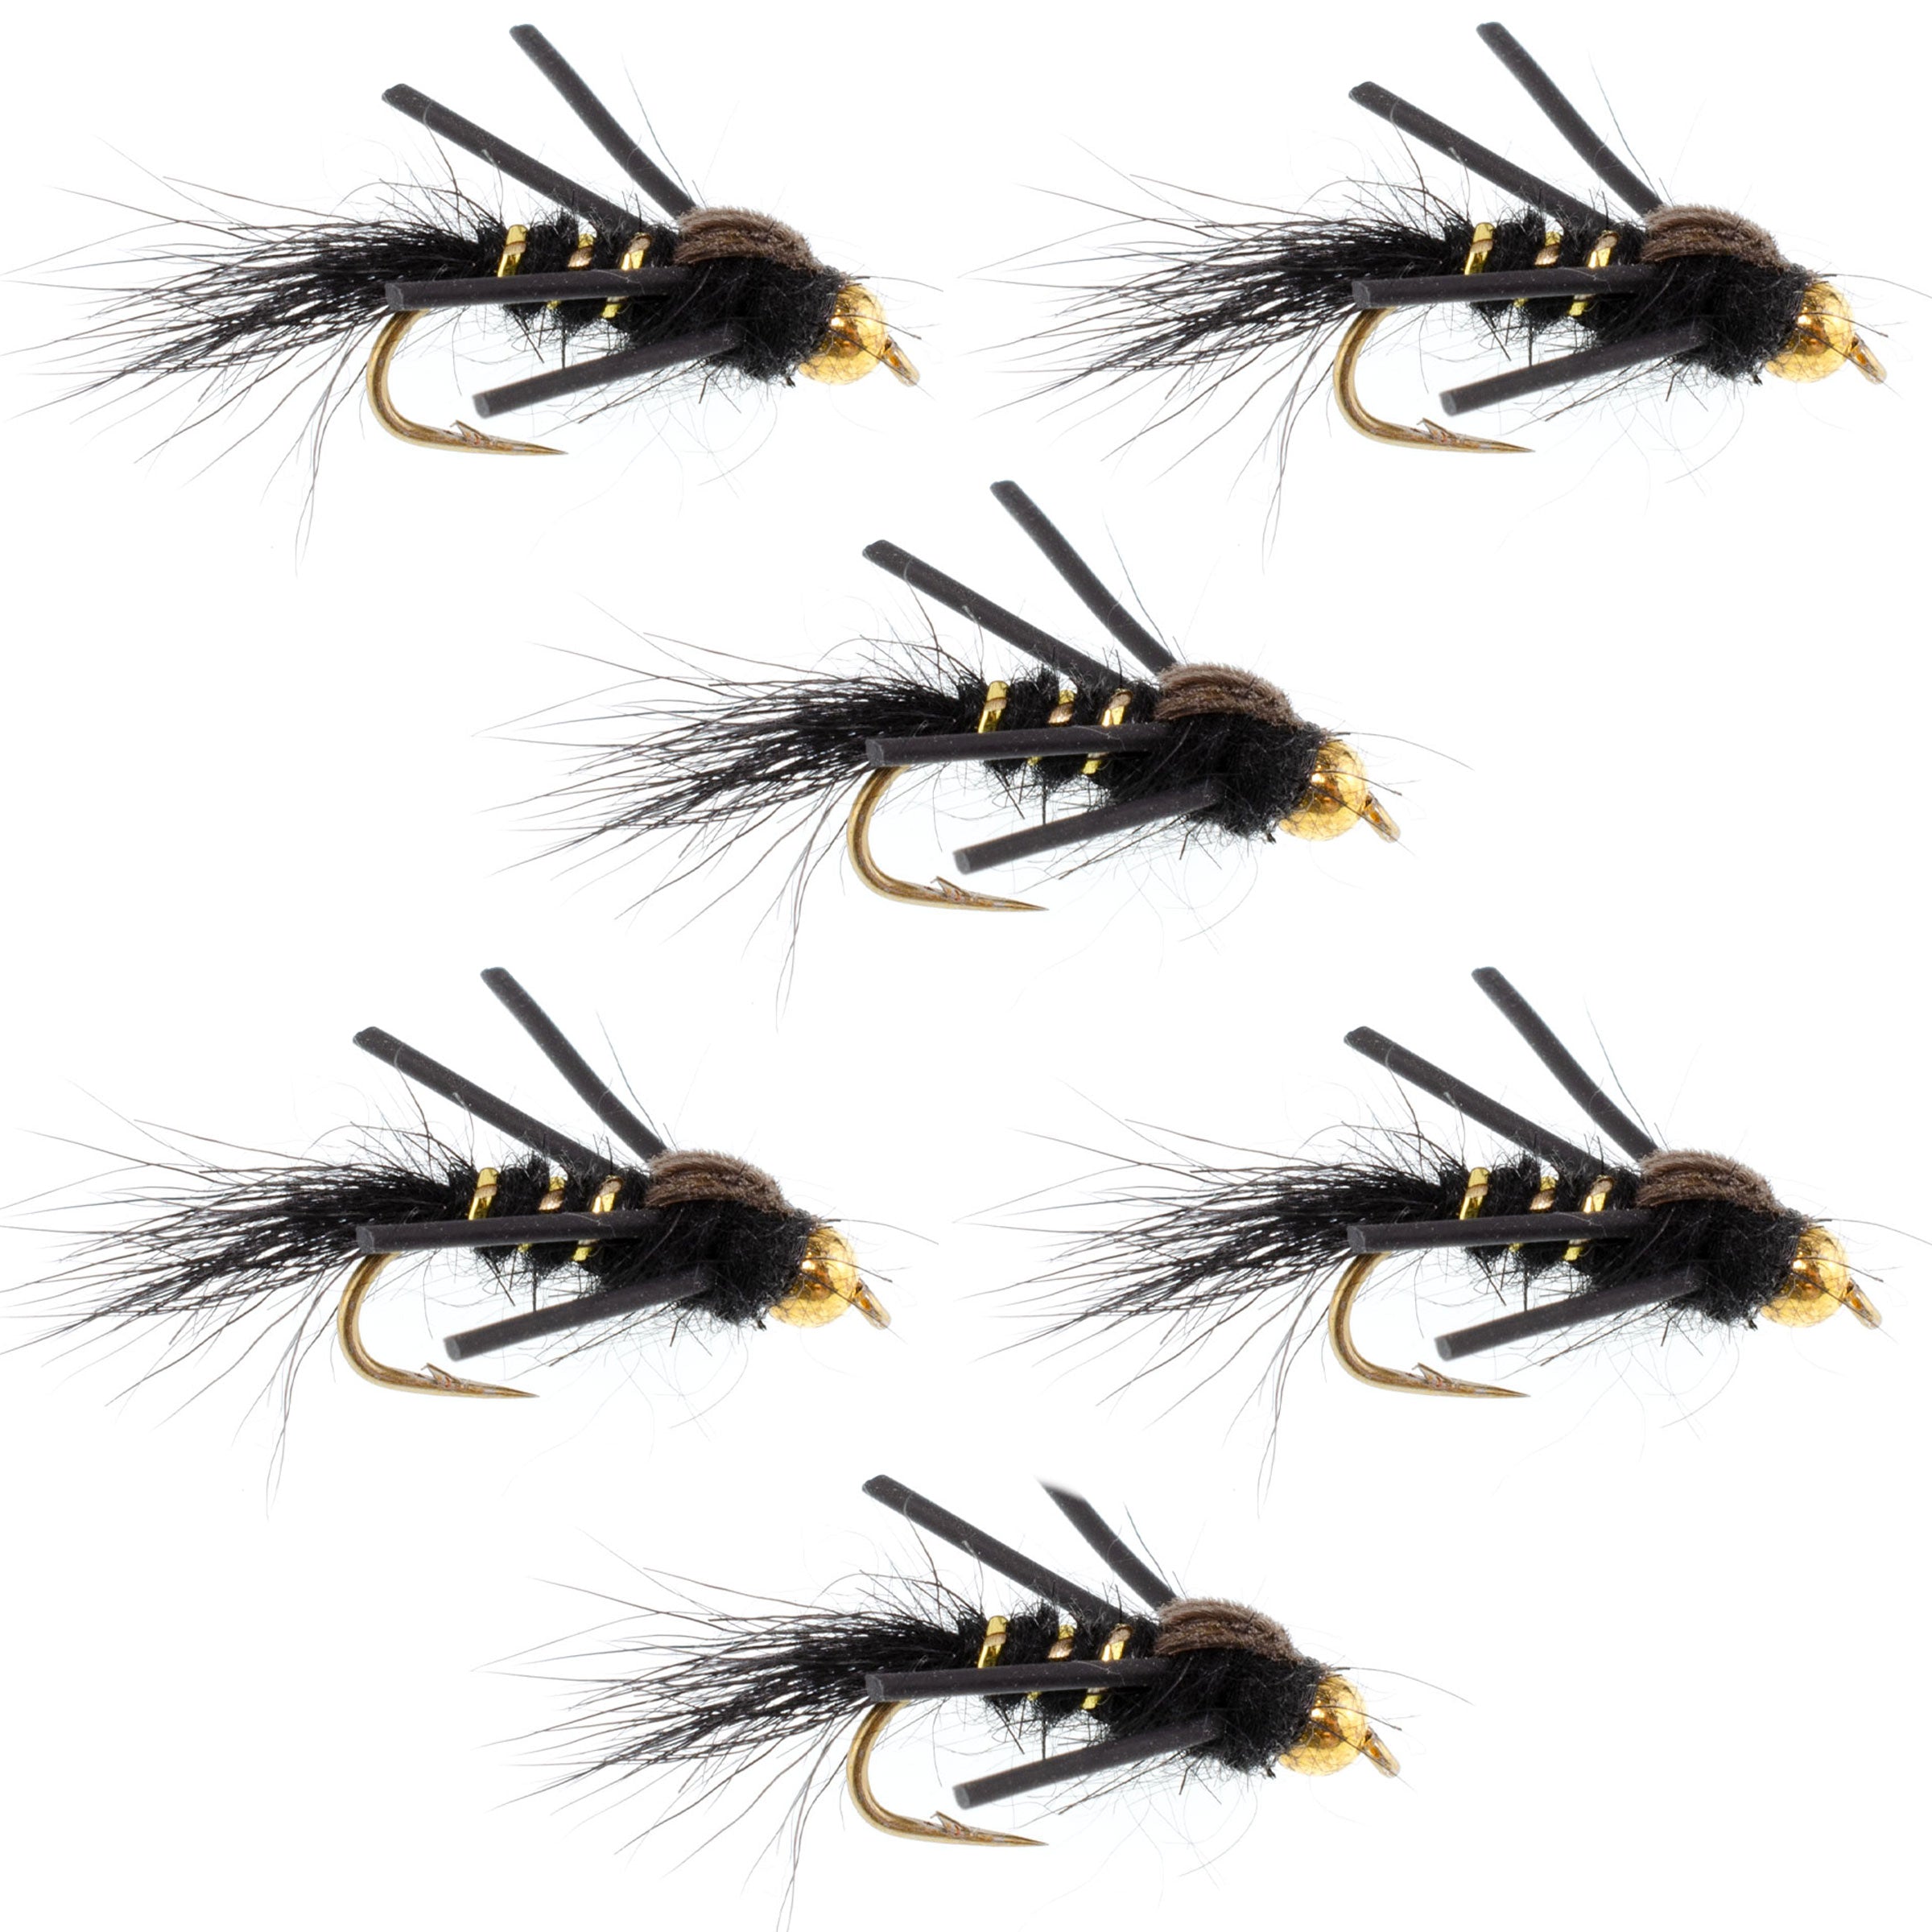 Tungsten Bead Head Rubber Legs Black Gold-Ribbed Hare's Ear Trout Fly Nymph - 6 Flies Hook Size 16